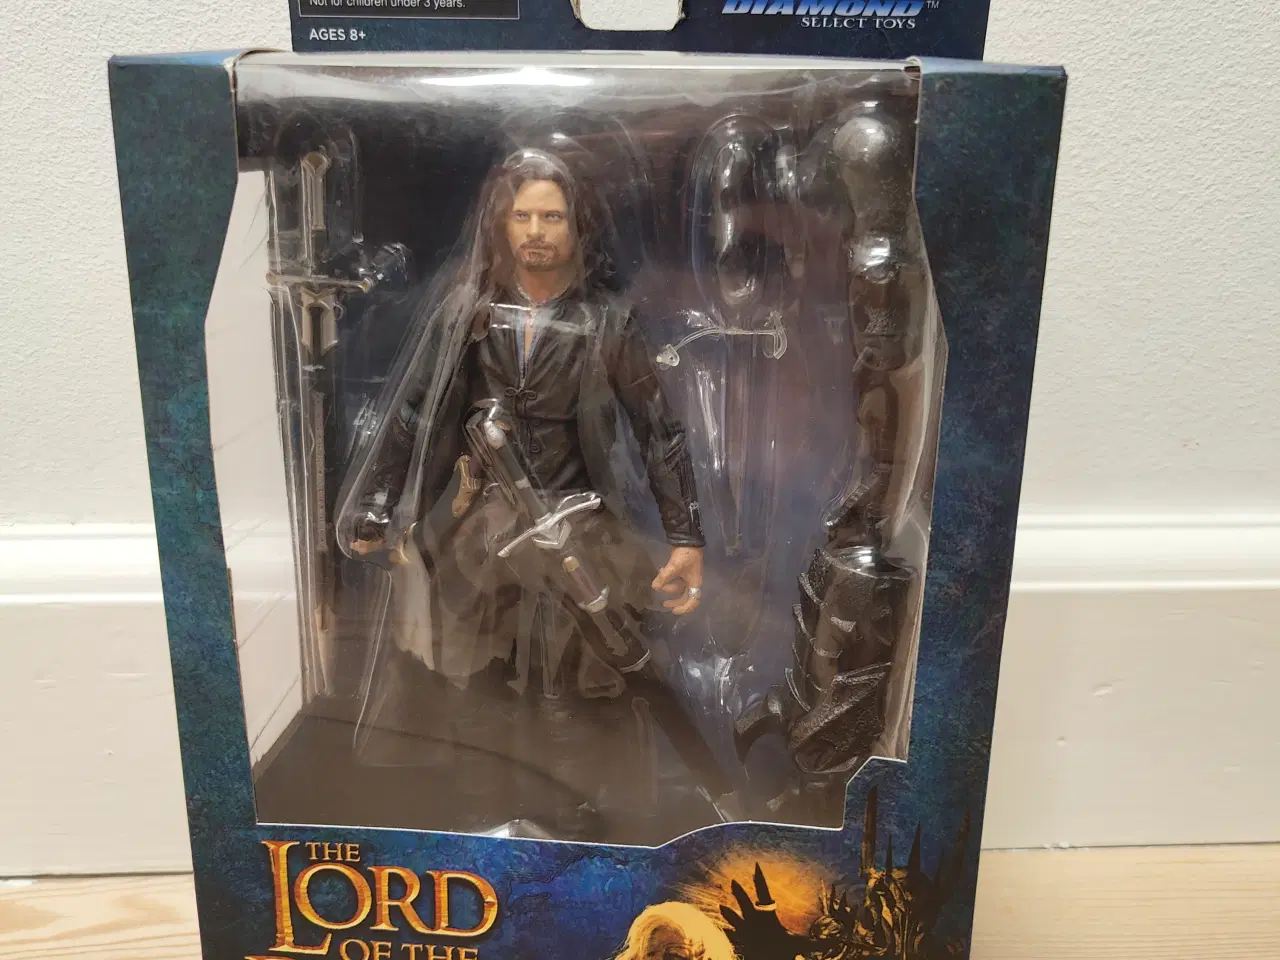 Billede 1 - The Lord of the Rings Aragorn figur